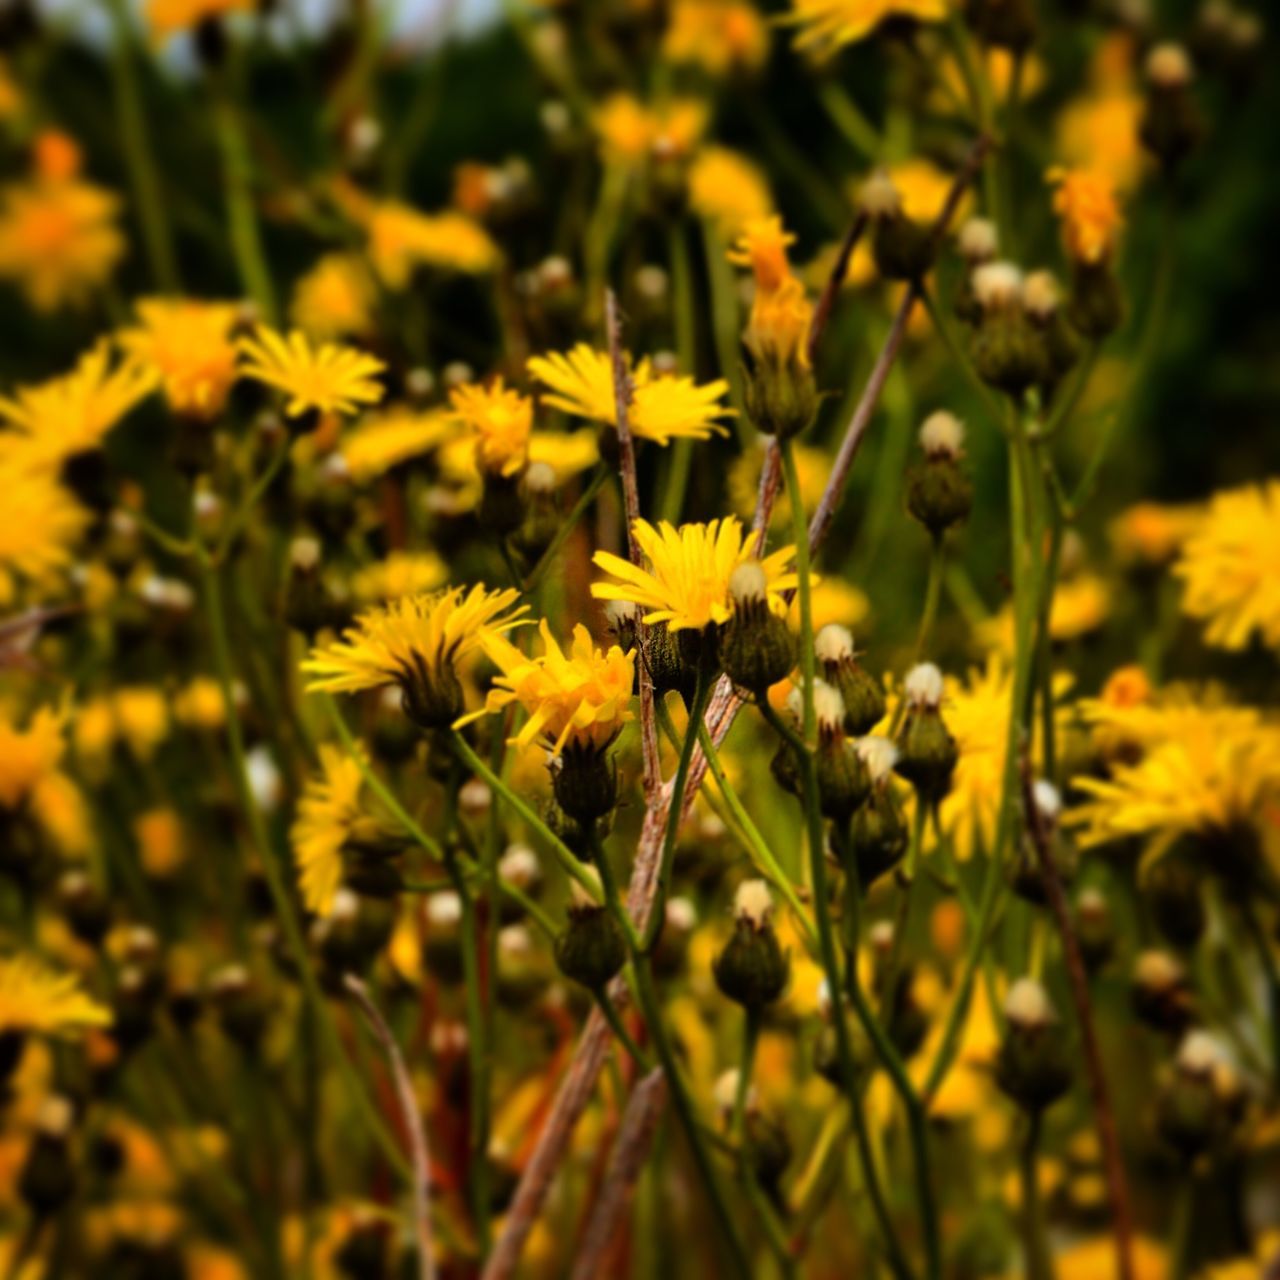 flower, yellow, growth, freshness, fragility, beauty in nature, petal, nature, plant, focus on foreground, blooming, field, selective focus, close-up, flower head, in bloom, outdoors, day, stem, no people